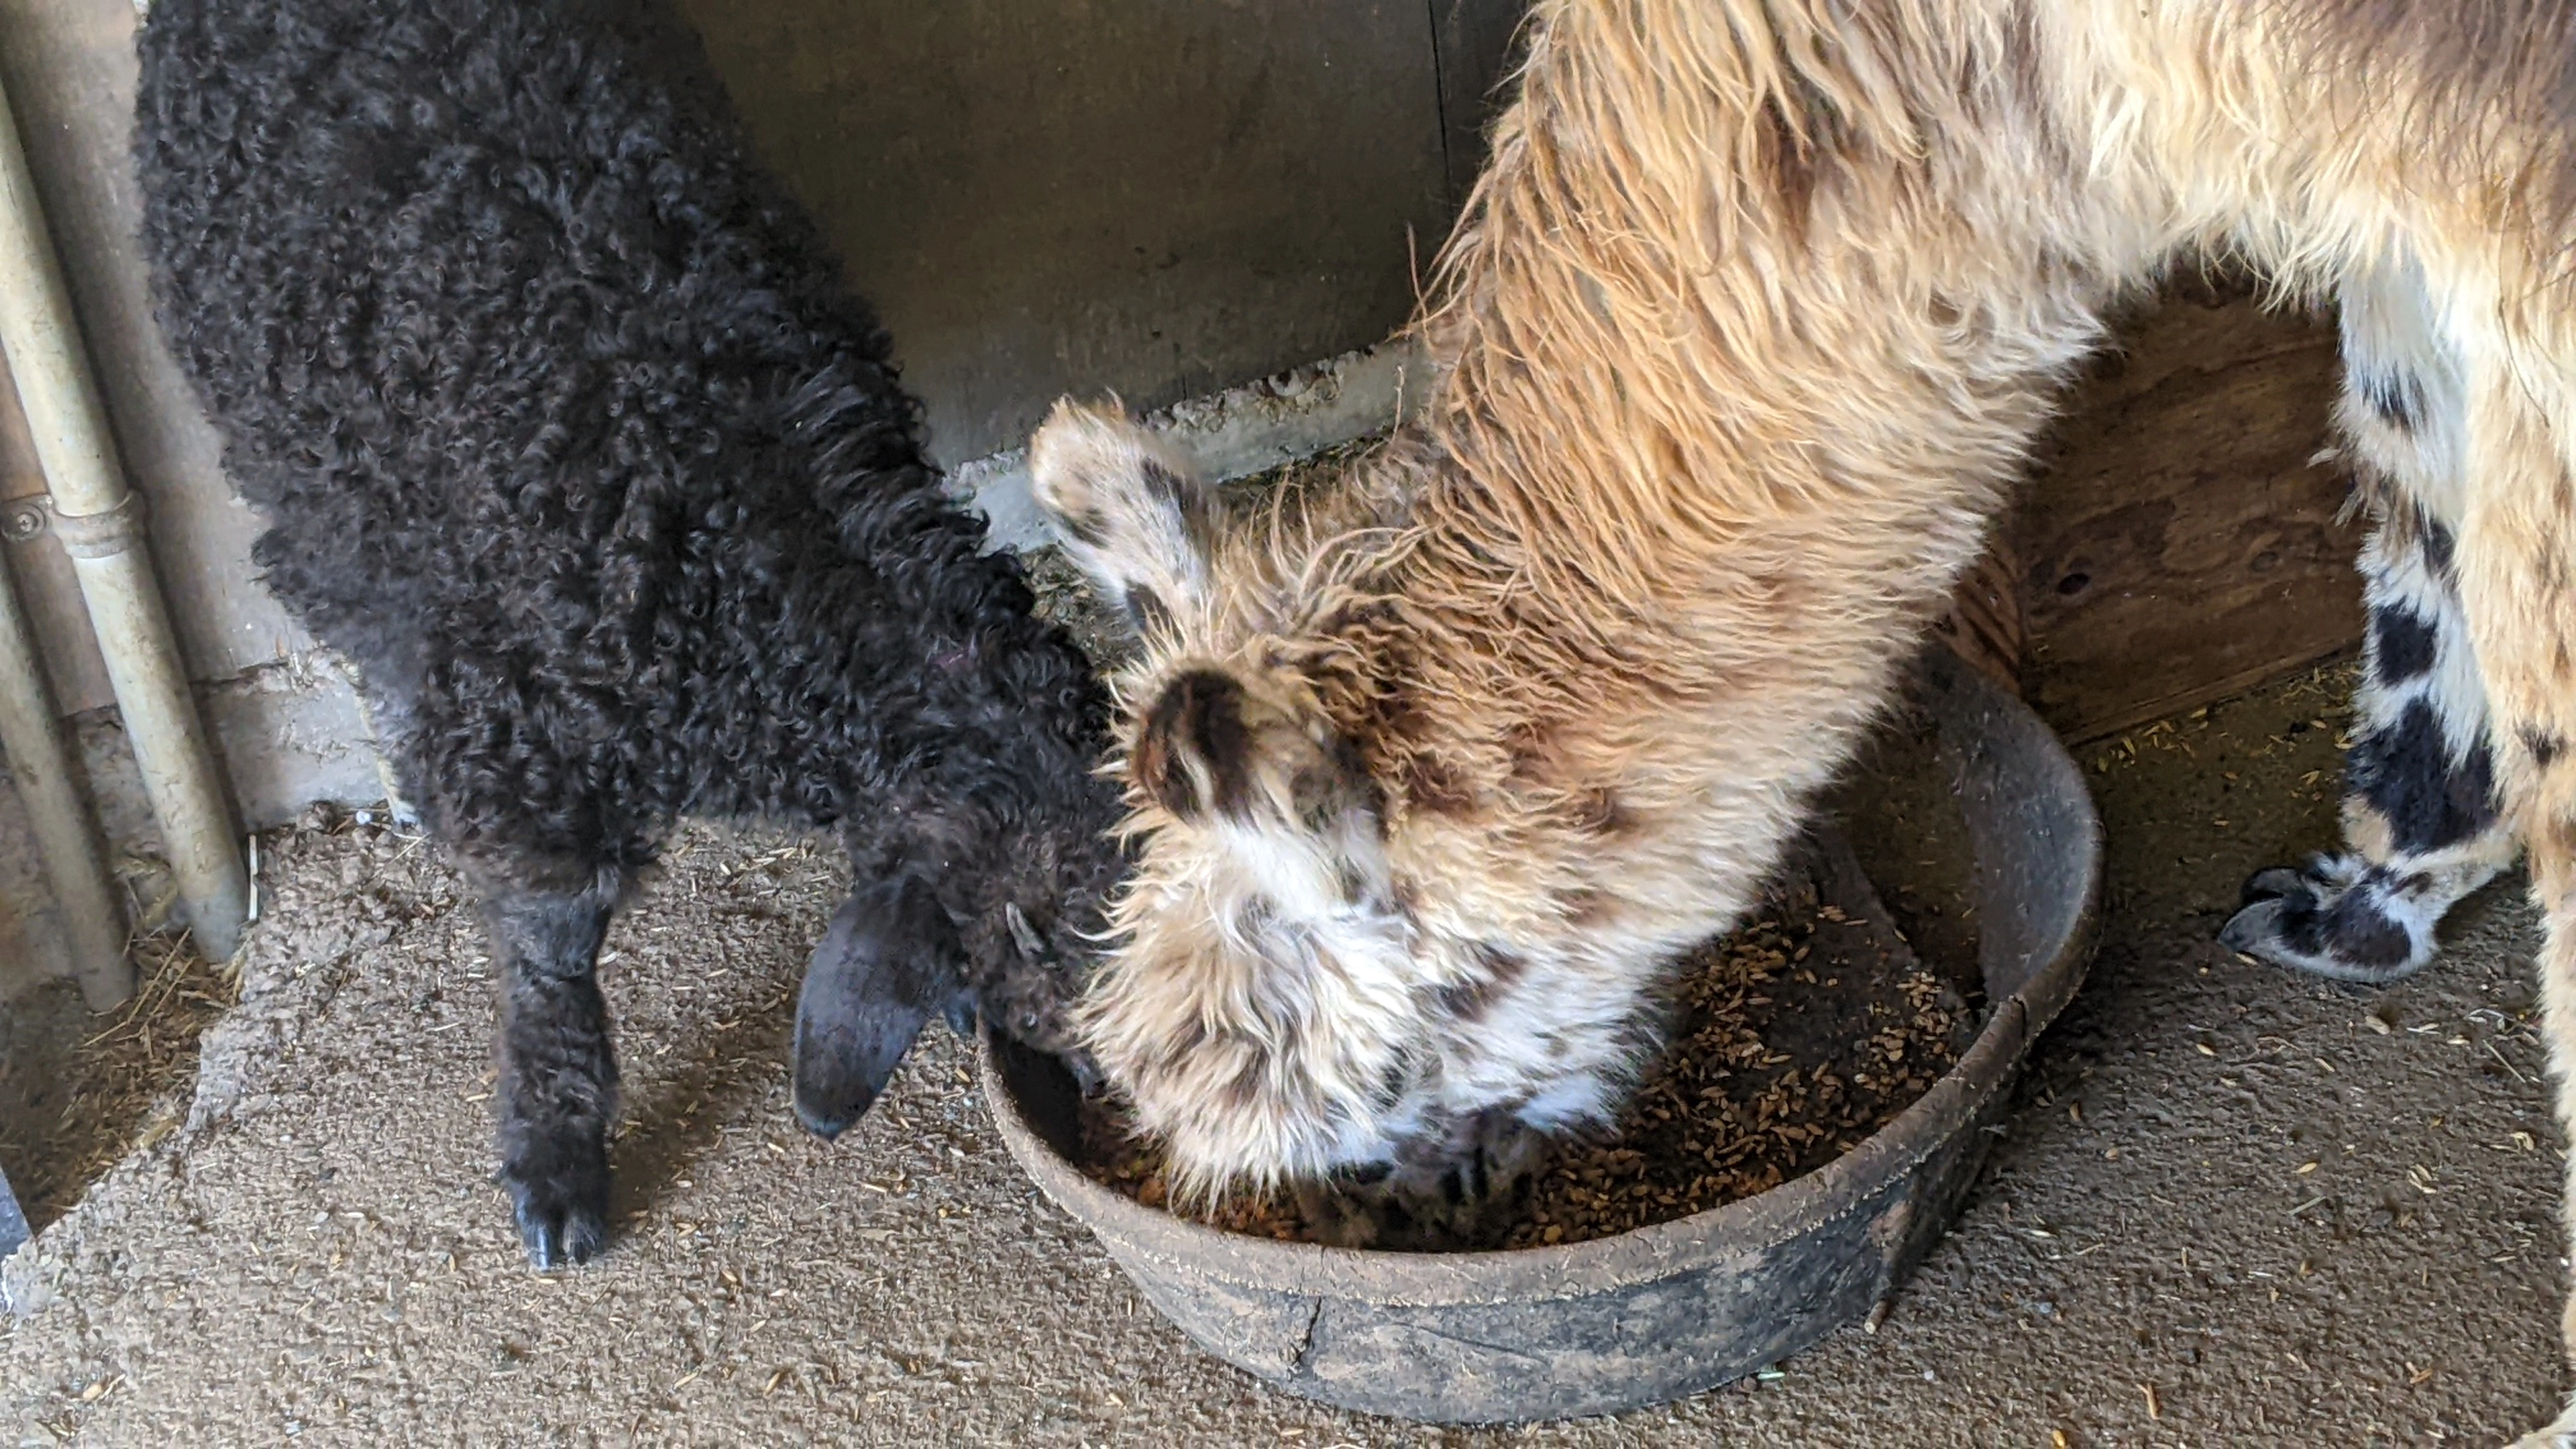 An image of a goat named Teff sharing a feed tray with a llama named Fitz